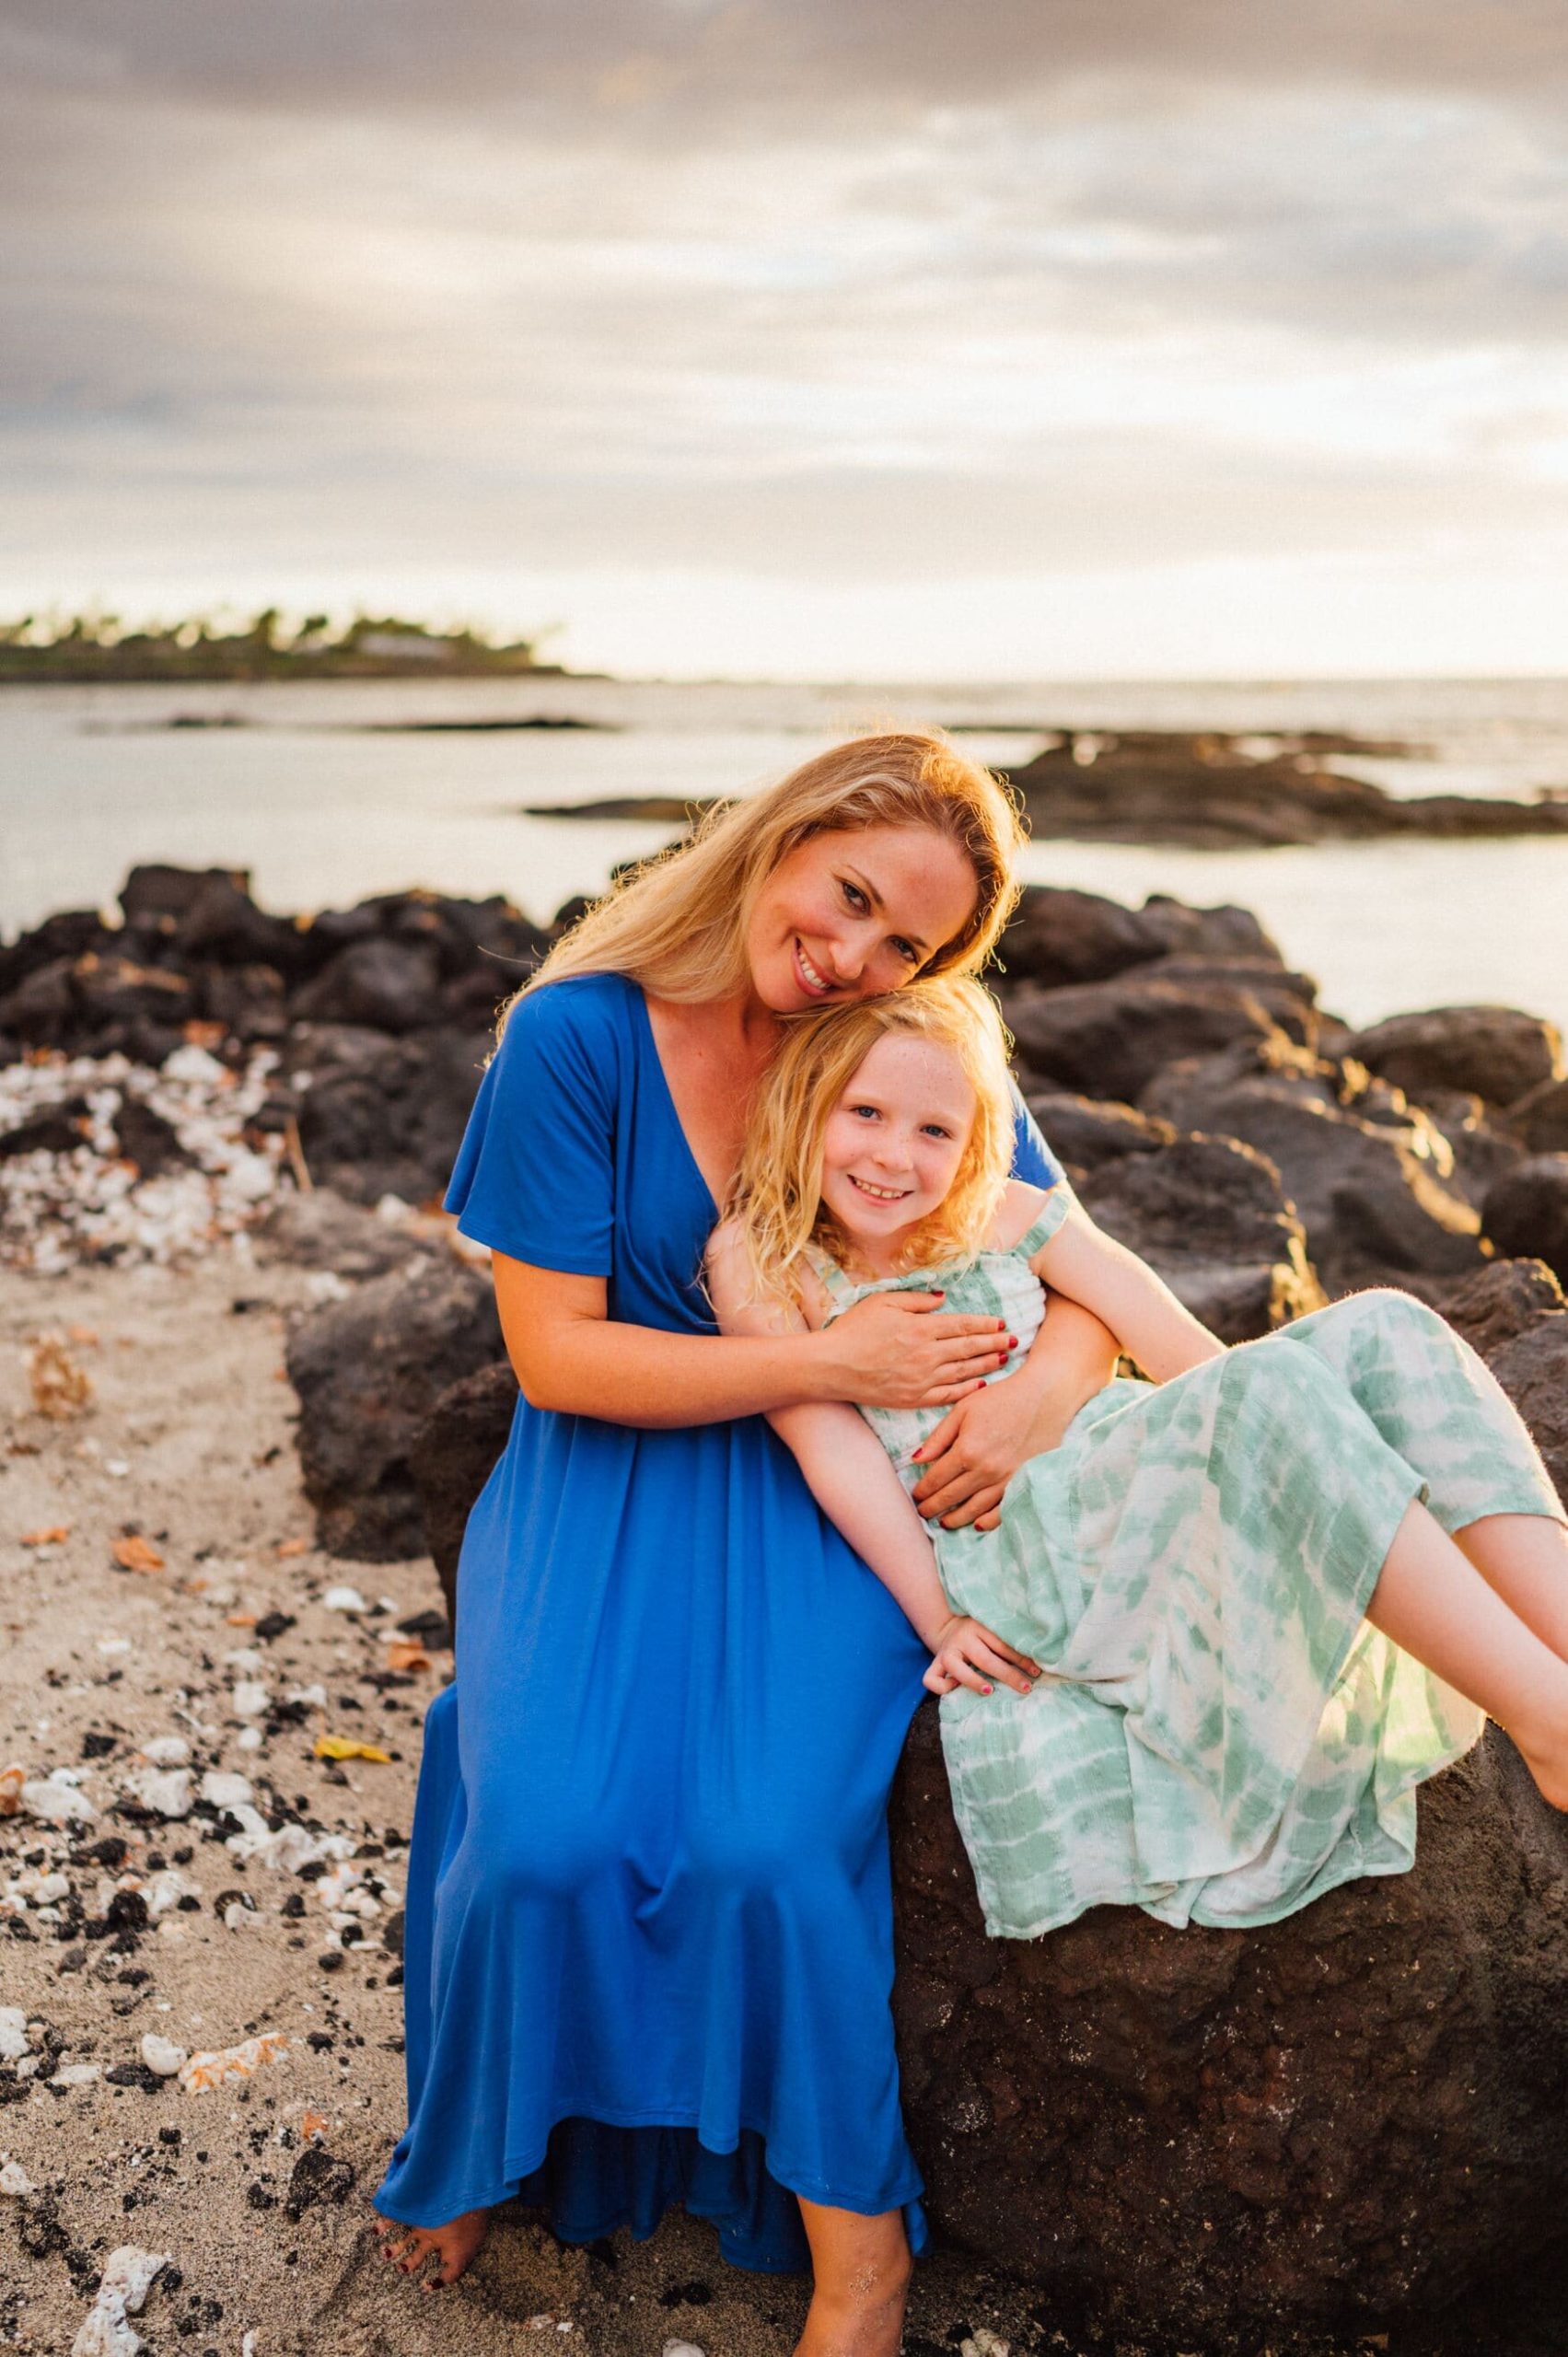 mother-daughter-photo-session-beach-11.jpg